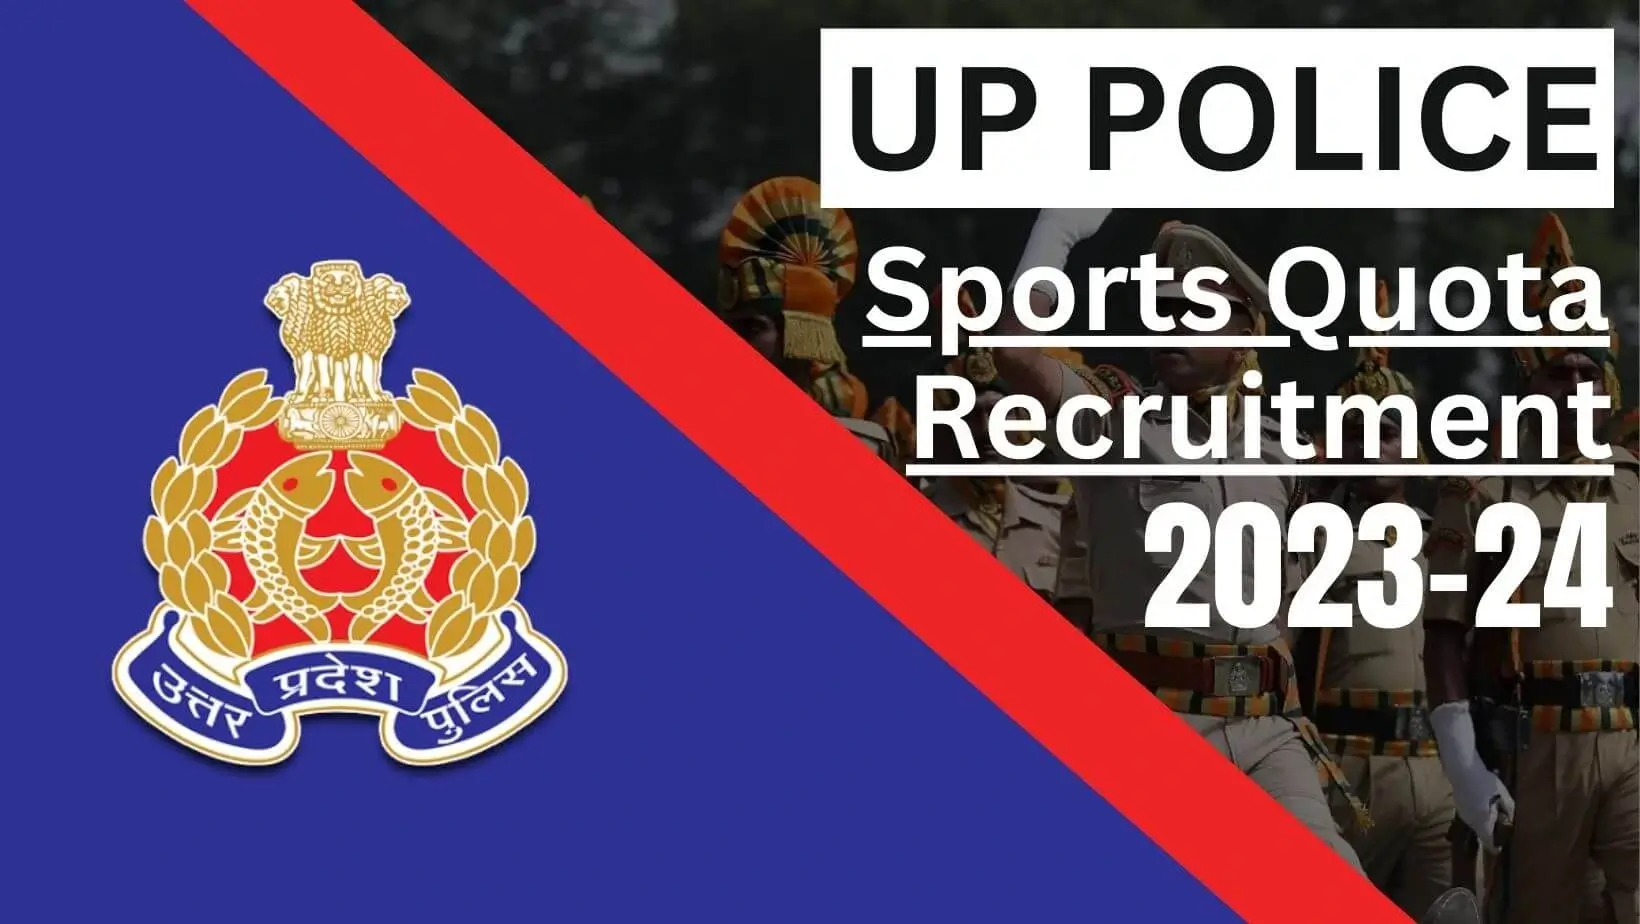 UP Police Recruitment 2023-24